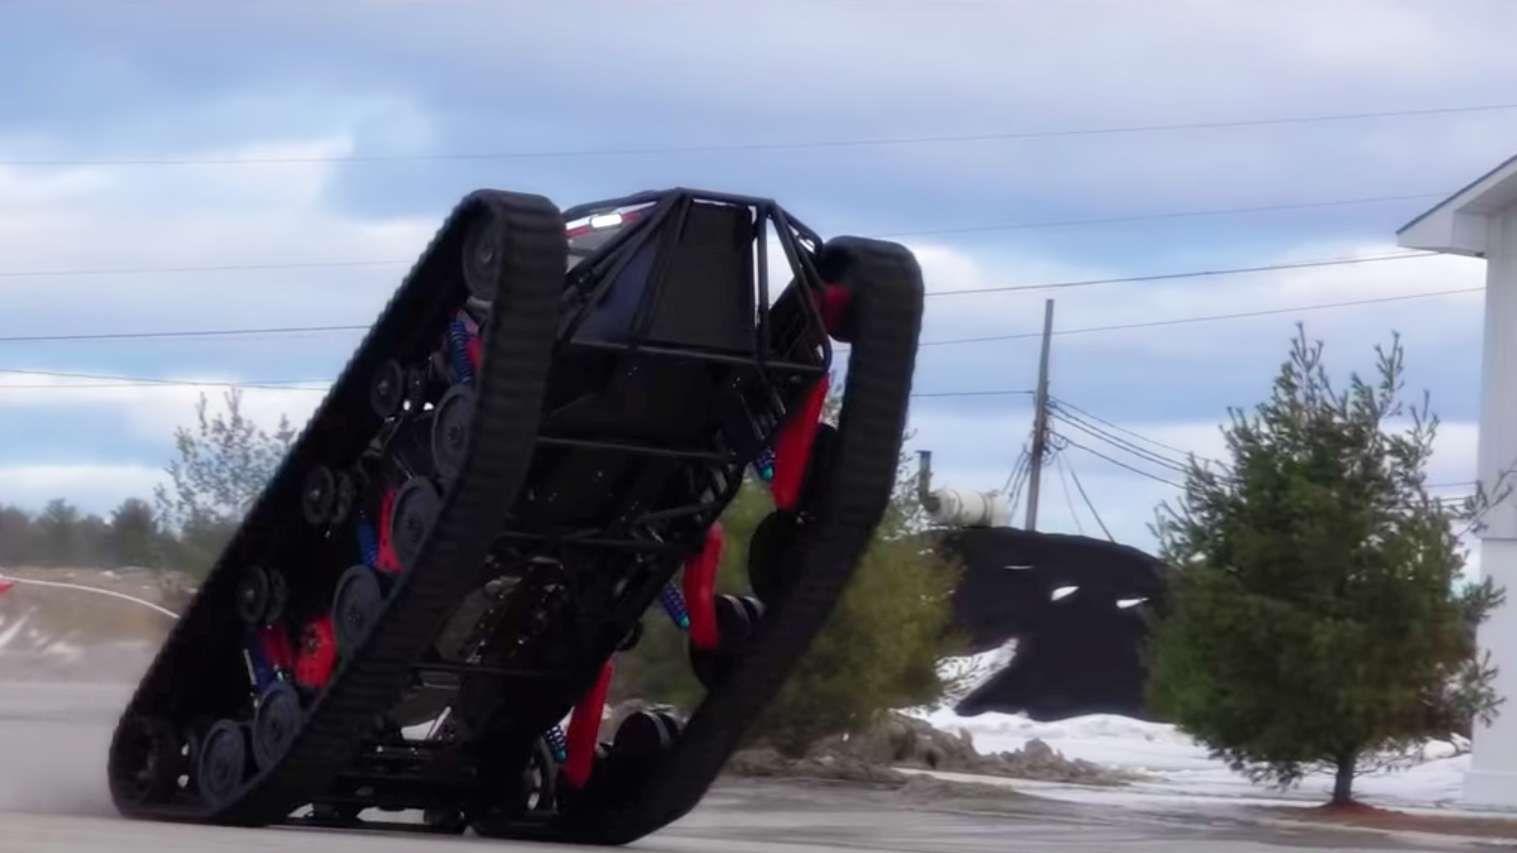 Ripsaw EV3F1 is so powerful, it can pull wheelies DriveMag Cars